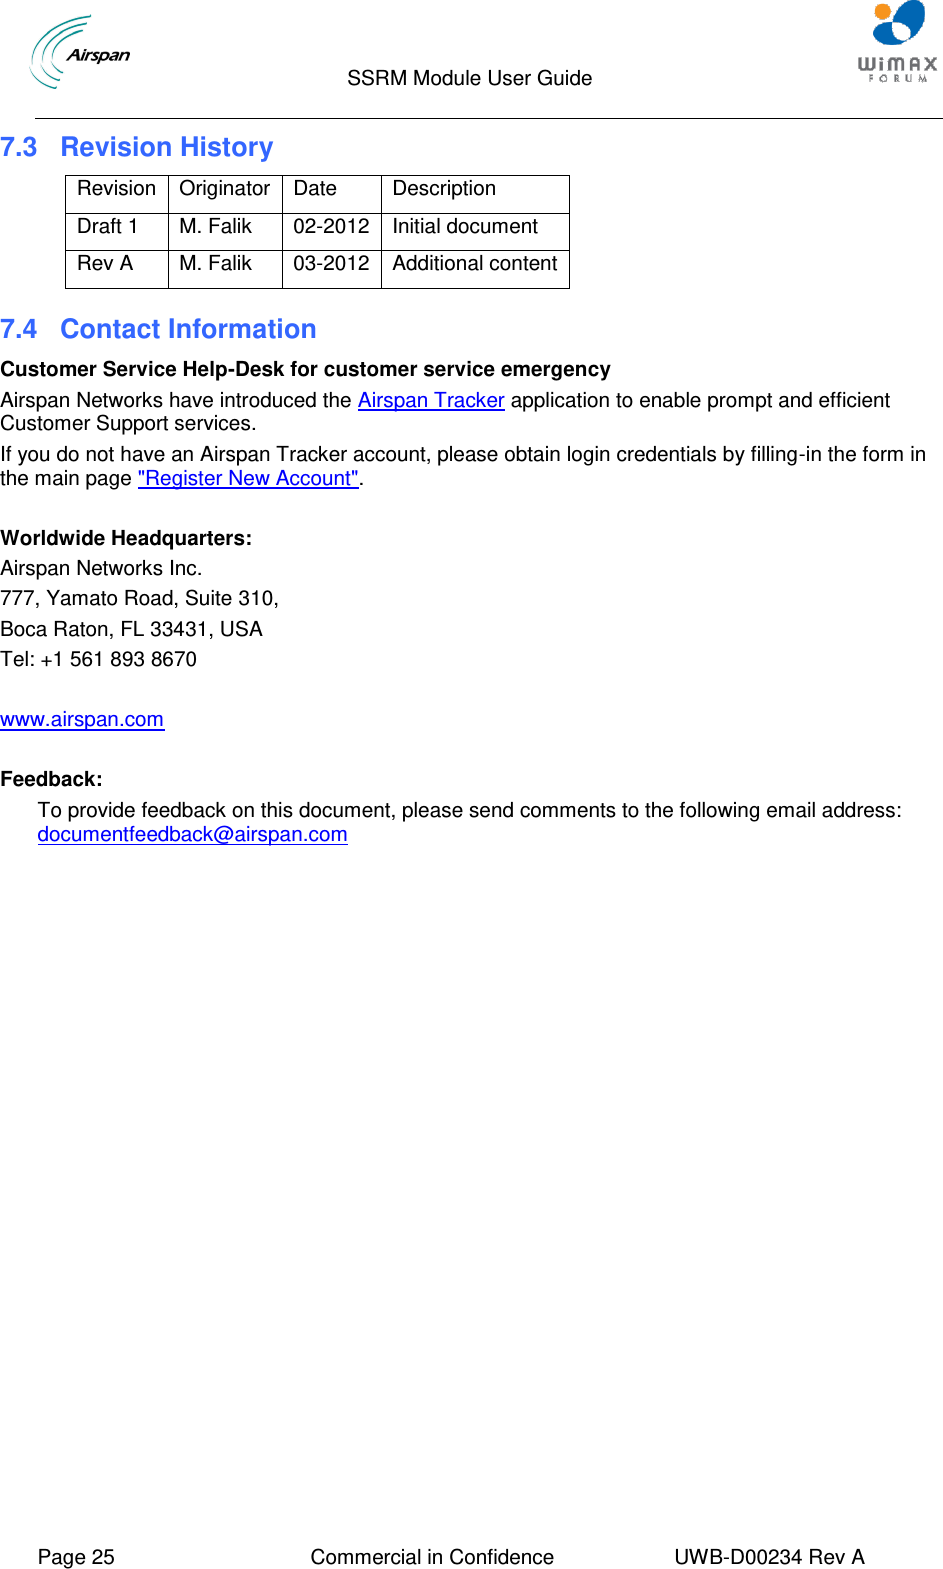                                  SSRM Module User Guide     Page 25  Commercial in Confidence  UWB-D00234 Rev A    7.3  Revision History Revision Originator Date Description Draft 1 M. Falik 02-2012 Initial document Rev A M. Falik 03-2012 Additional content 7.4 Contact Information Customer Service Help-Desk for customer service emergency Airspan Networks have introduced the Airspan Tracker application to enable prompt and efficient Customer Support services. If you do not have an Airspan Tracker account, please obtain login credentials by filling-in the form in the main page &quot;Register New Account&quot;.  Worldwide Headquarters: Airspan Networks Inc. 777, Yamato Road, Suite 310, Boca Raton, FL 33431, USA Tel: +1 561 893 8670  www.airspan.com  Feedback: To provide feedback on this document, please send comments to the following email address: documentfeedback@airspan.com 